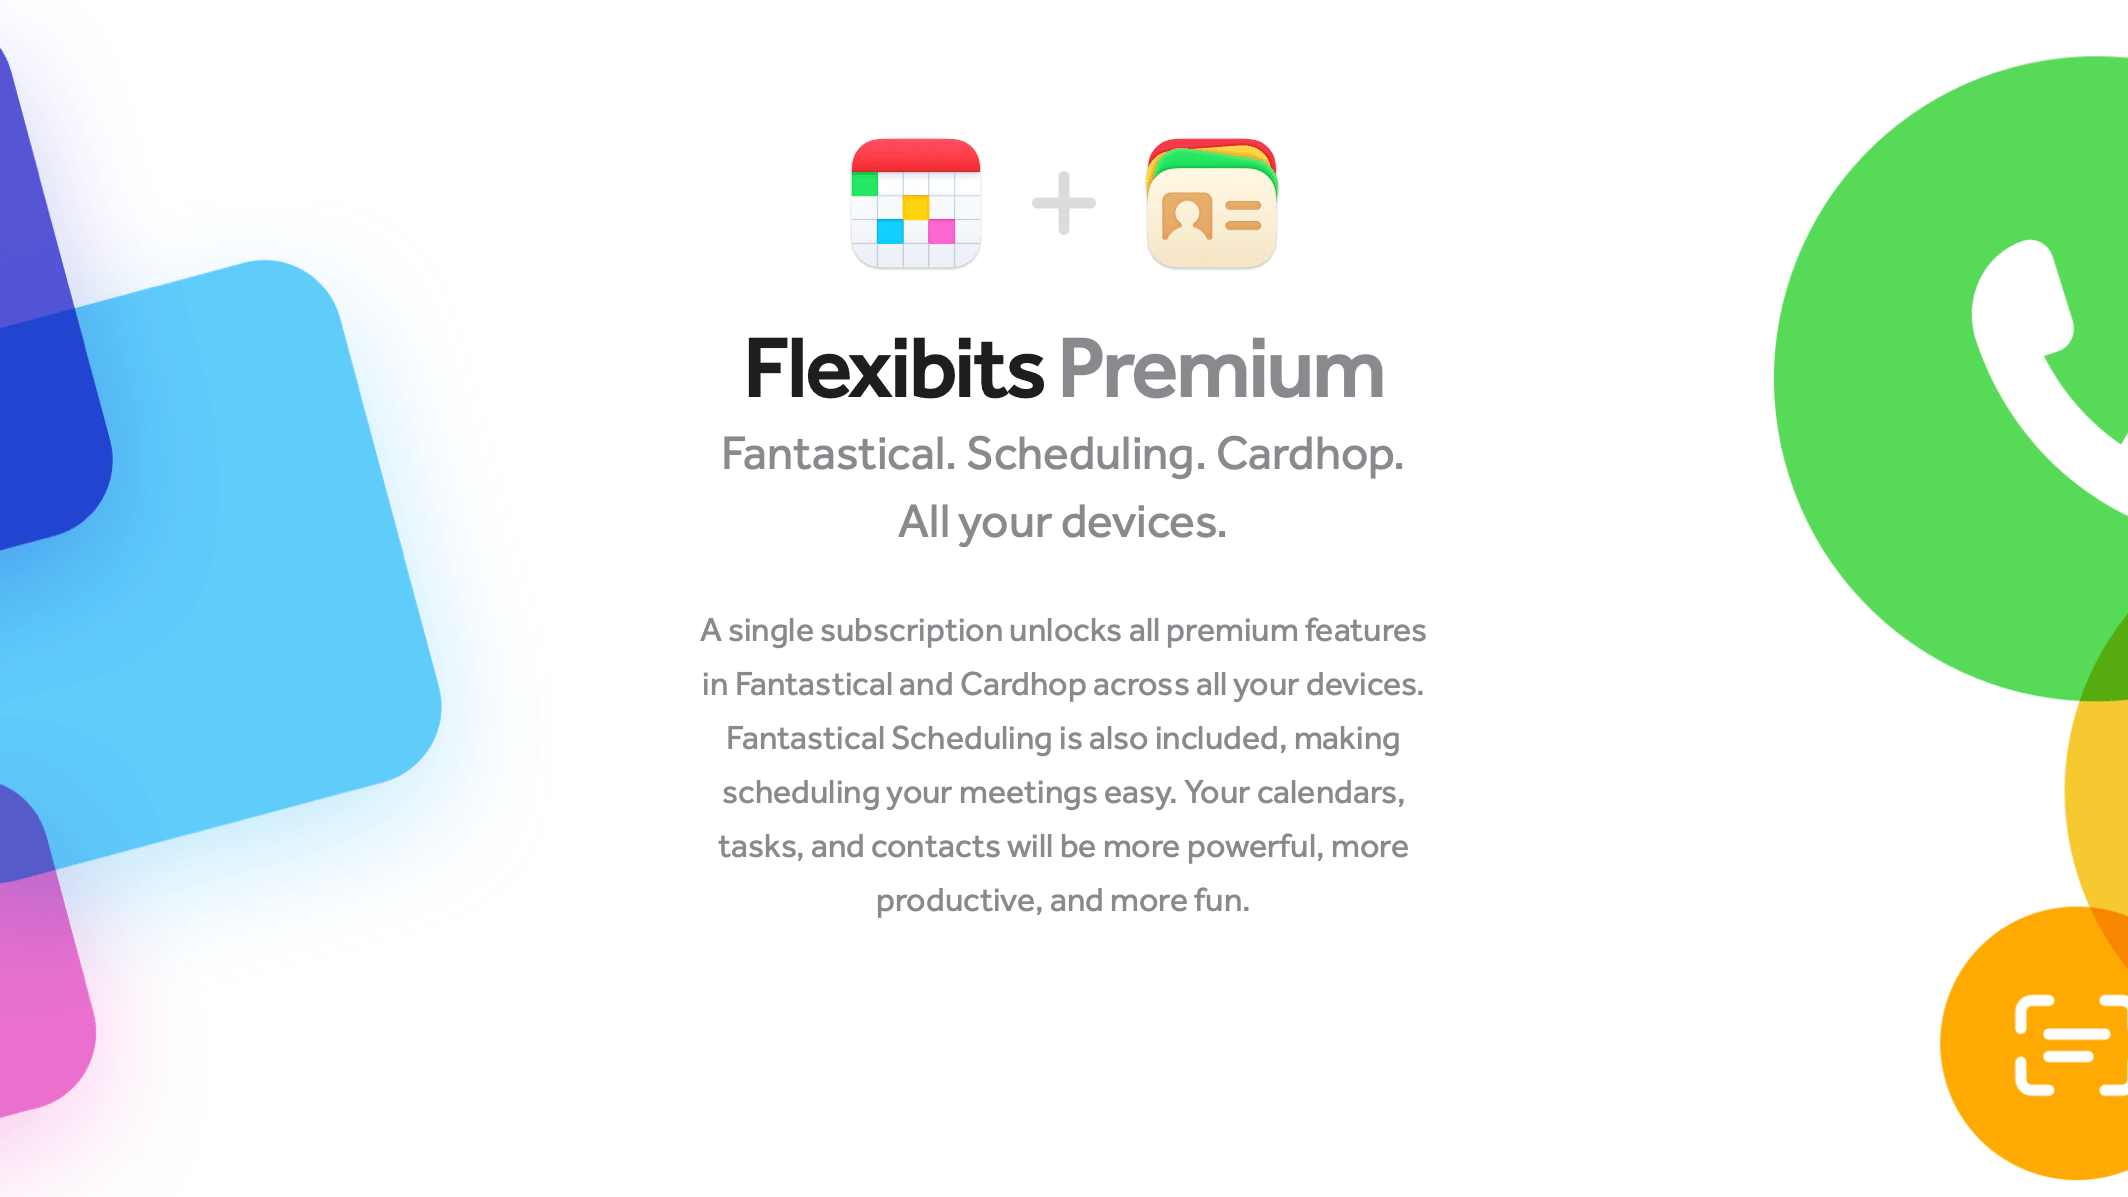 Banner promoting the Flexibits Premium subscription which includes access to all features in the Fantastical and Cardhop apps across apple devices